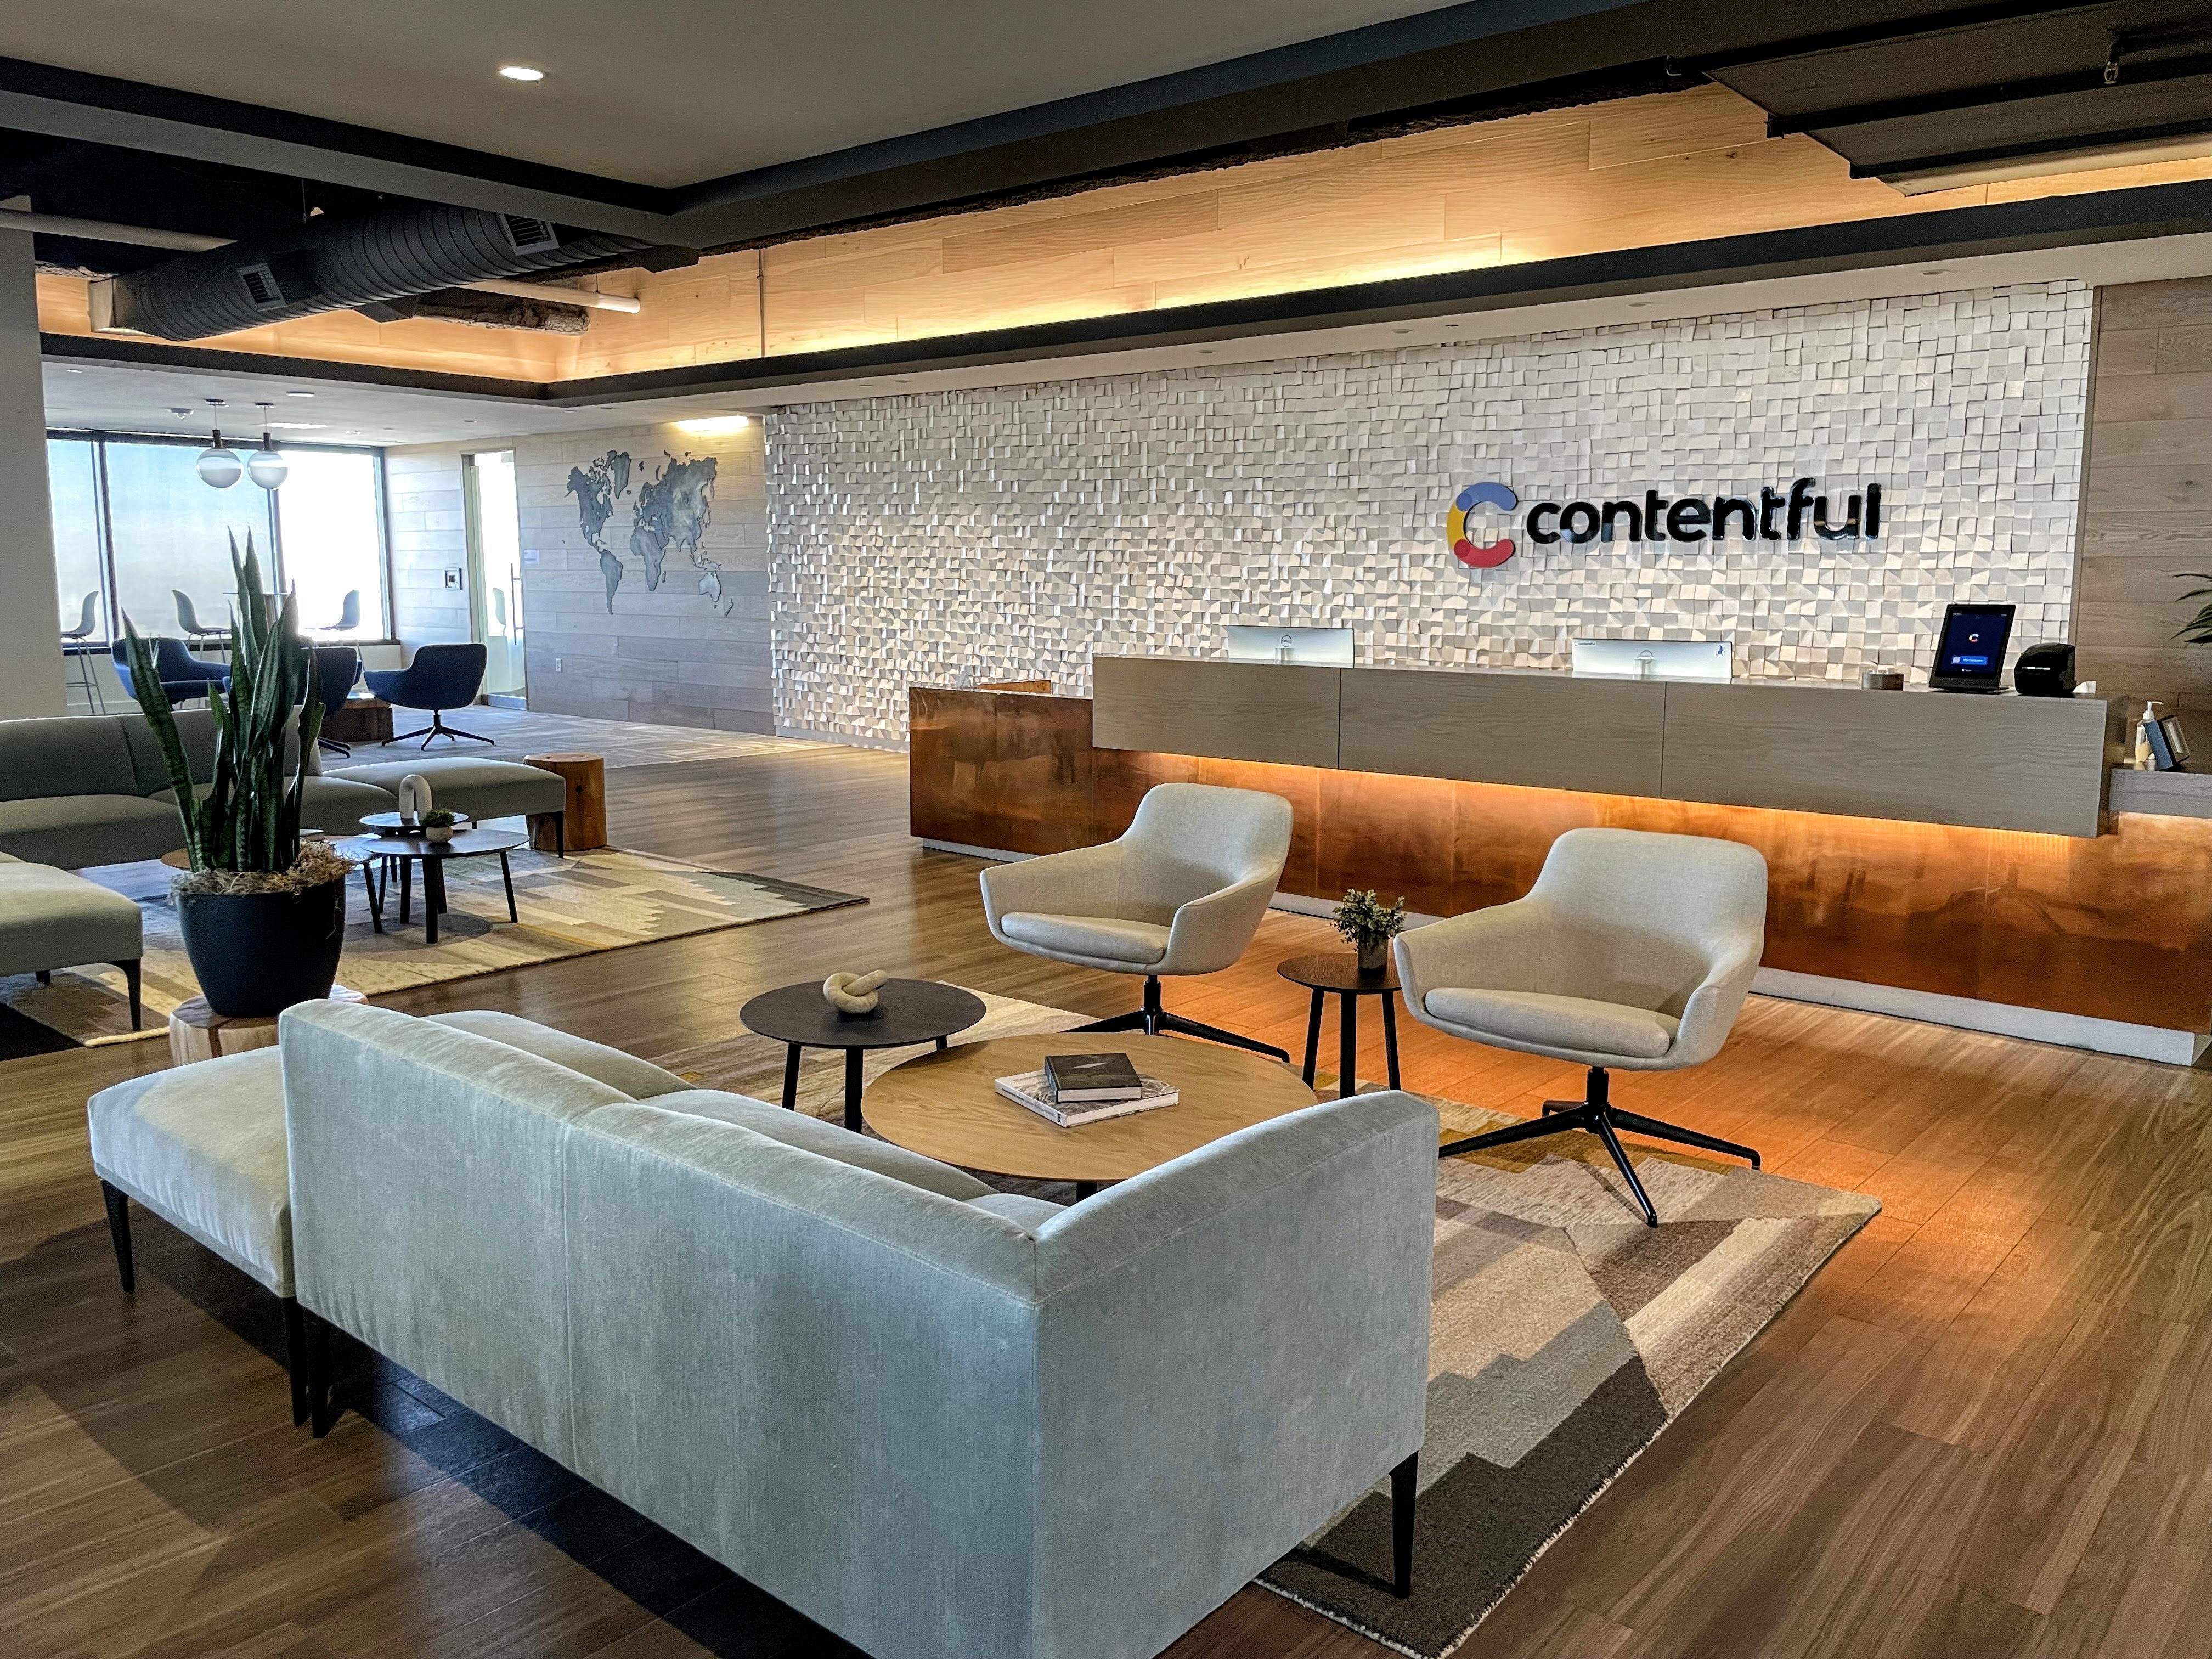 The Contentful office.